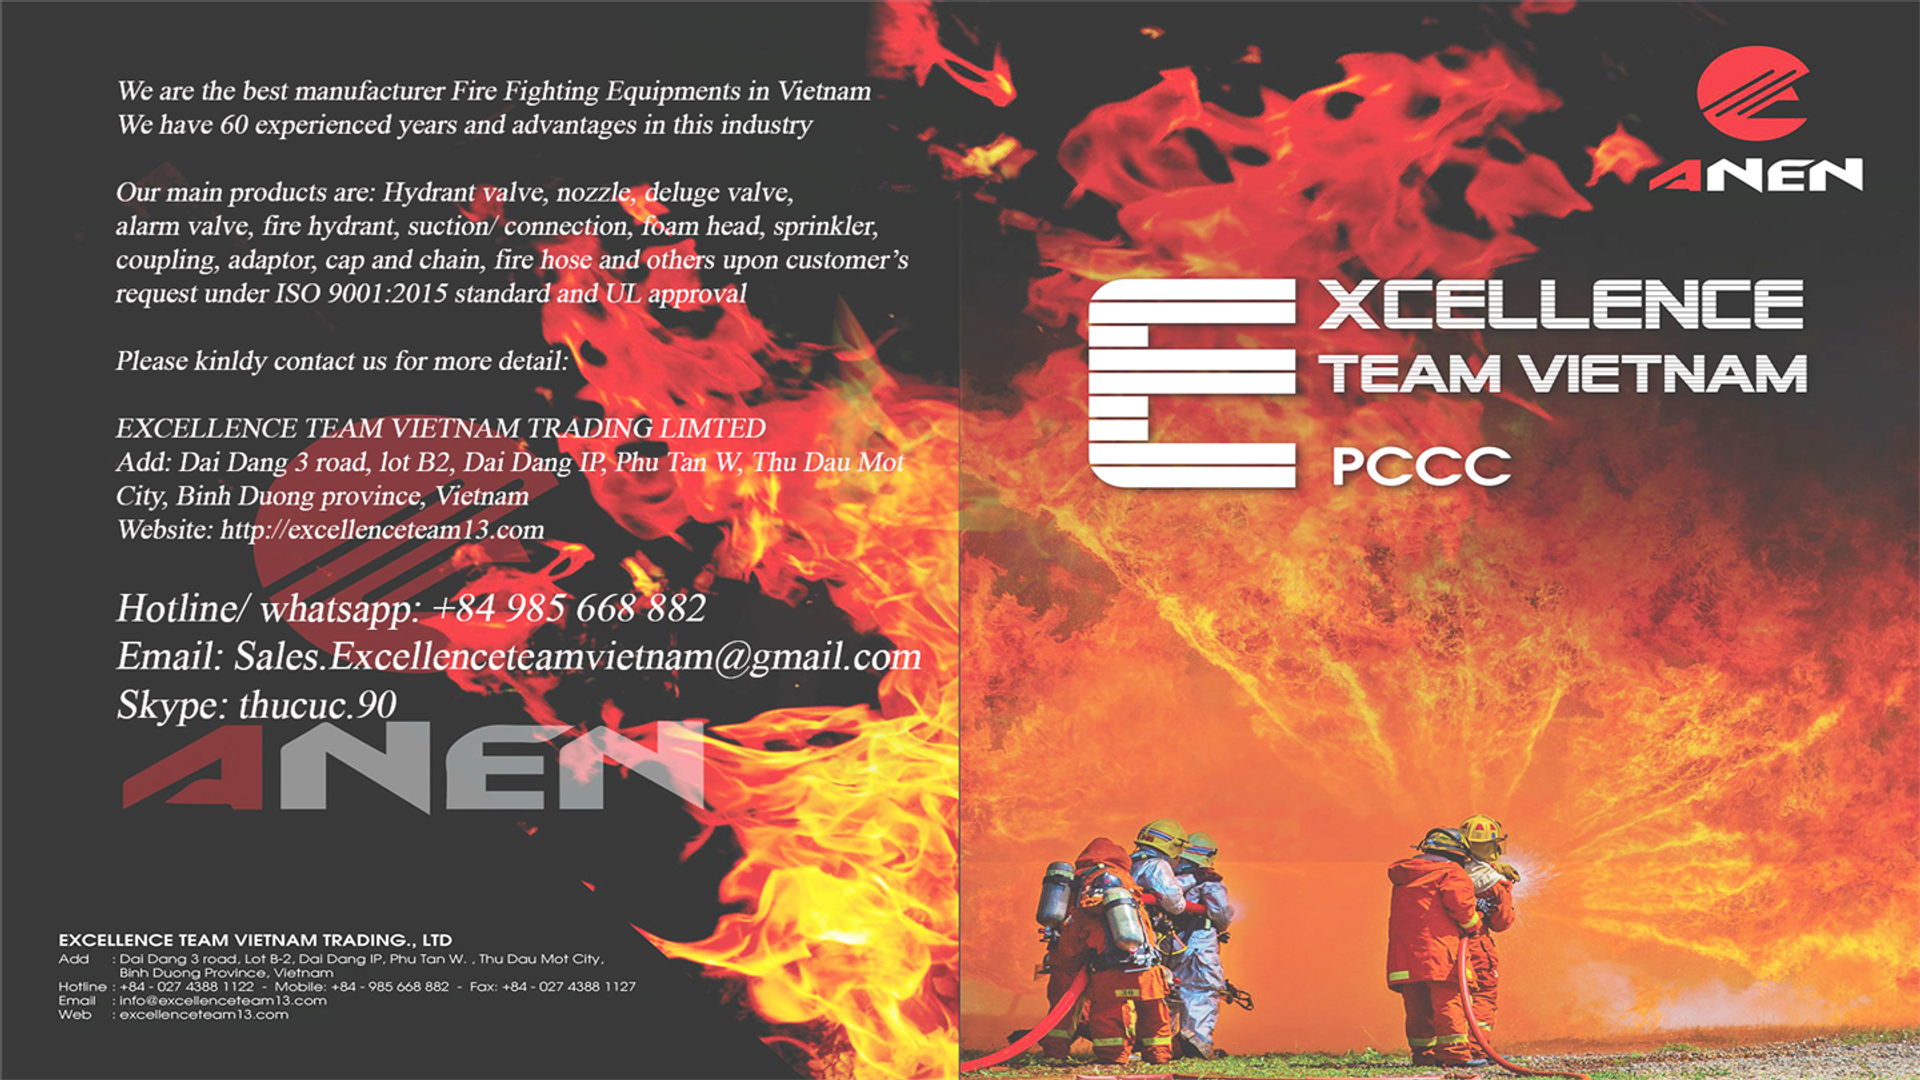 EXCELLENCE TEAM VIETNAM TRADING LIMITED - FIRE FIGHTING EQUIPMENTS